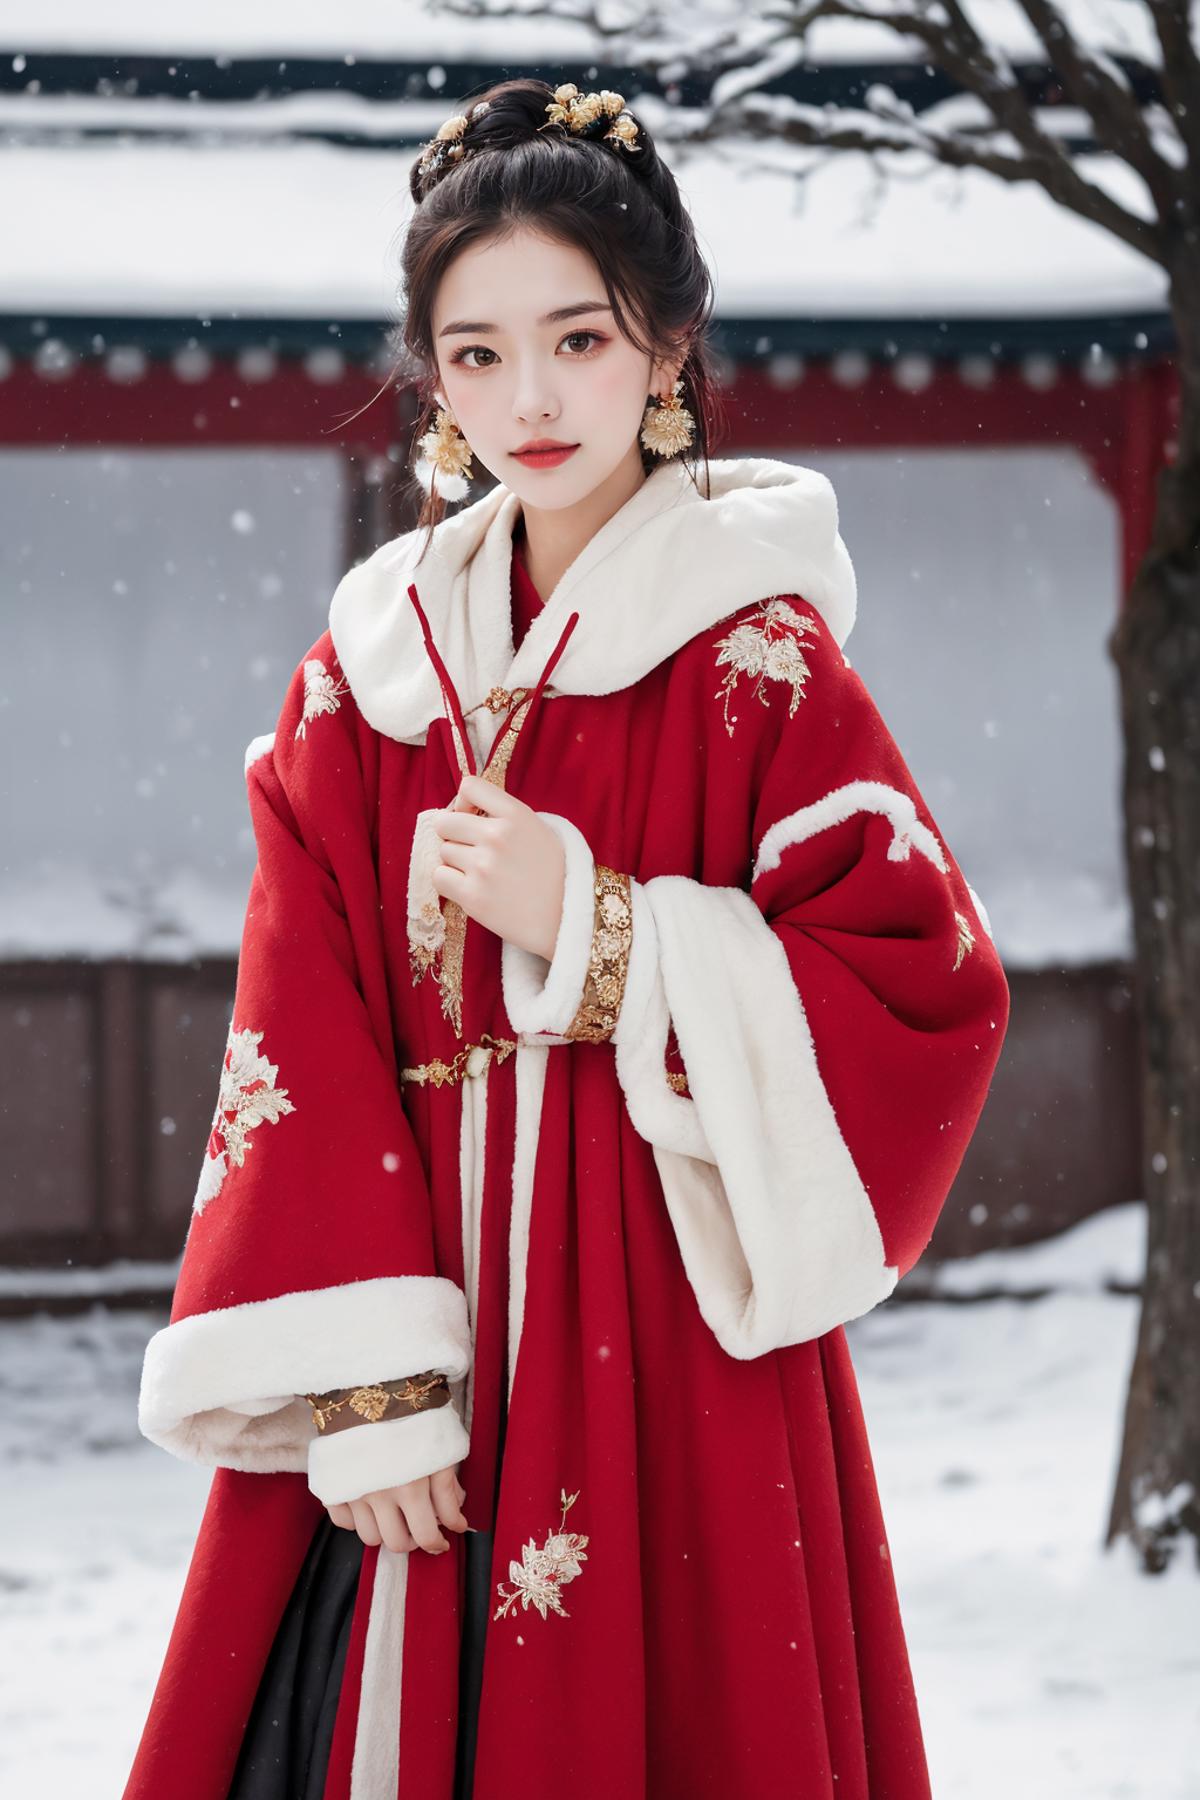 A woman wearing a red and white coat in the snow.